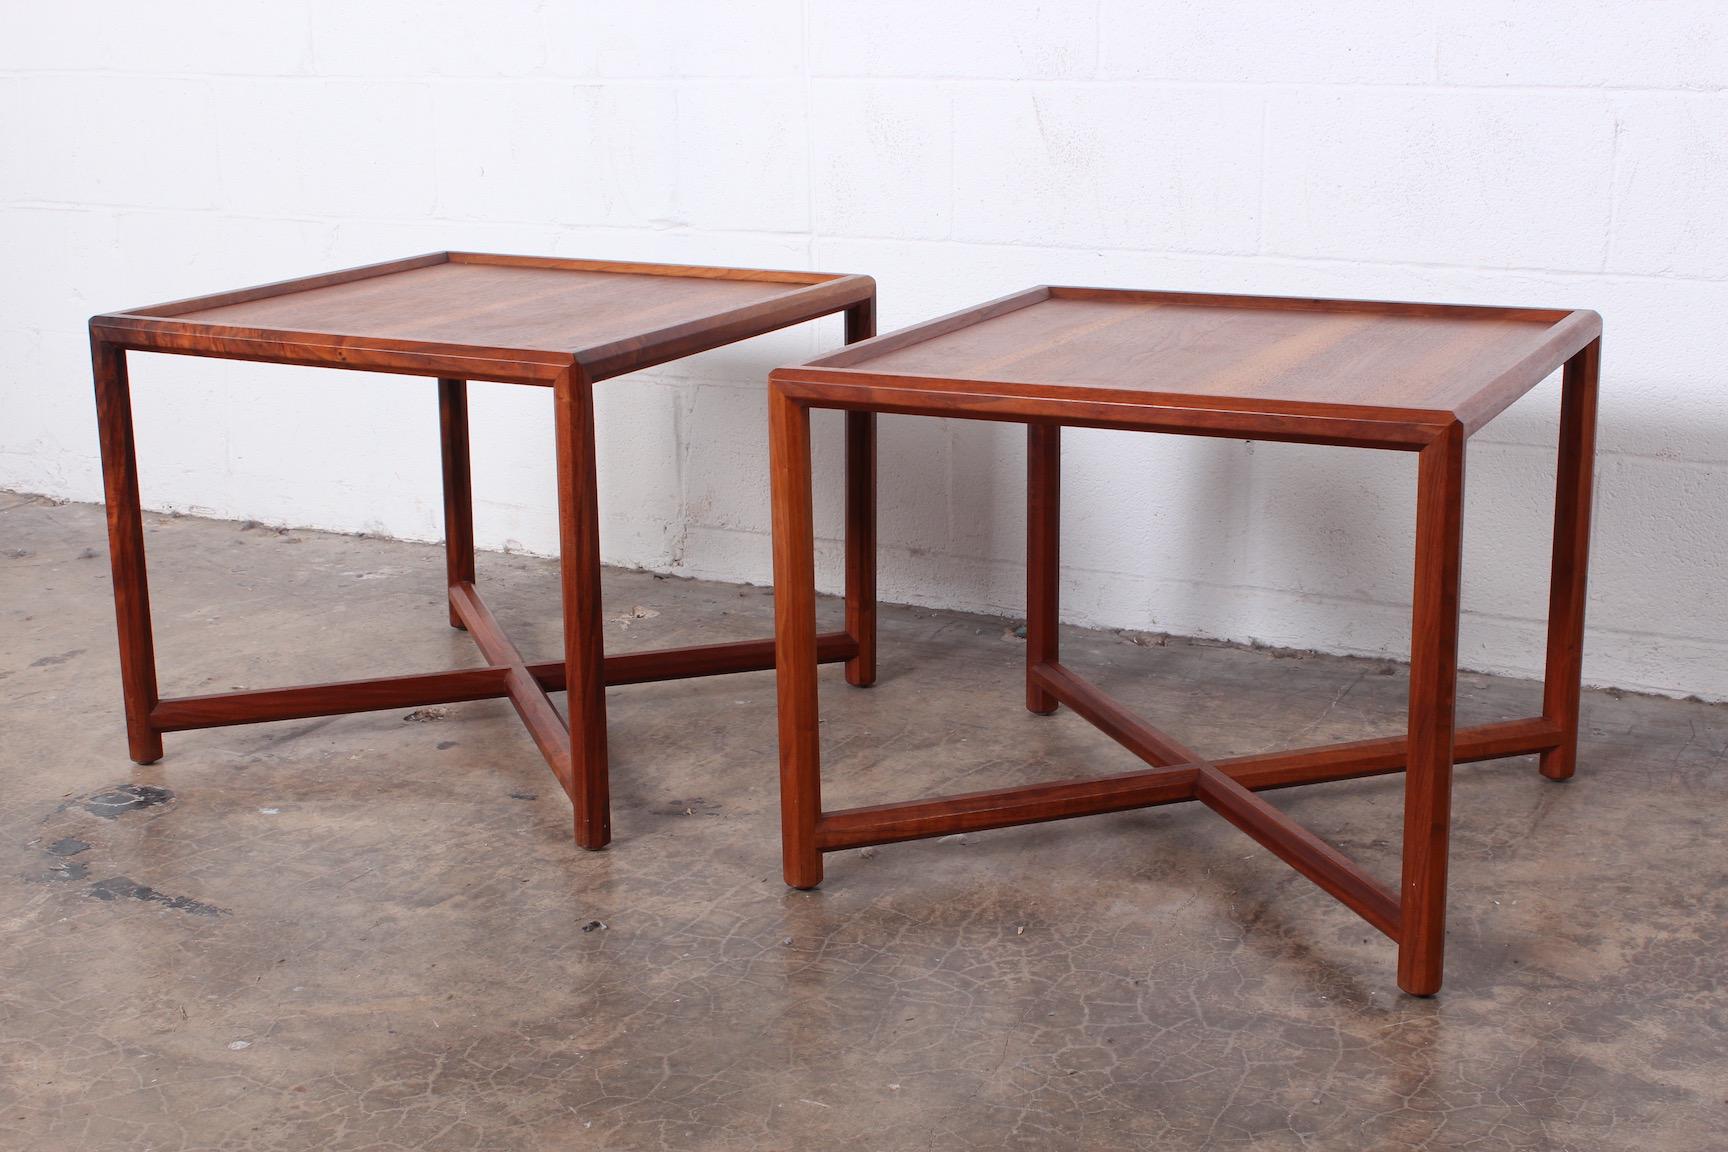 Mid-20th Century Pair of Tables by Edward Wormley for Dunbar